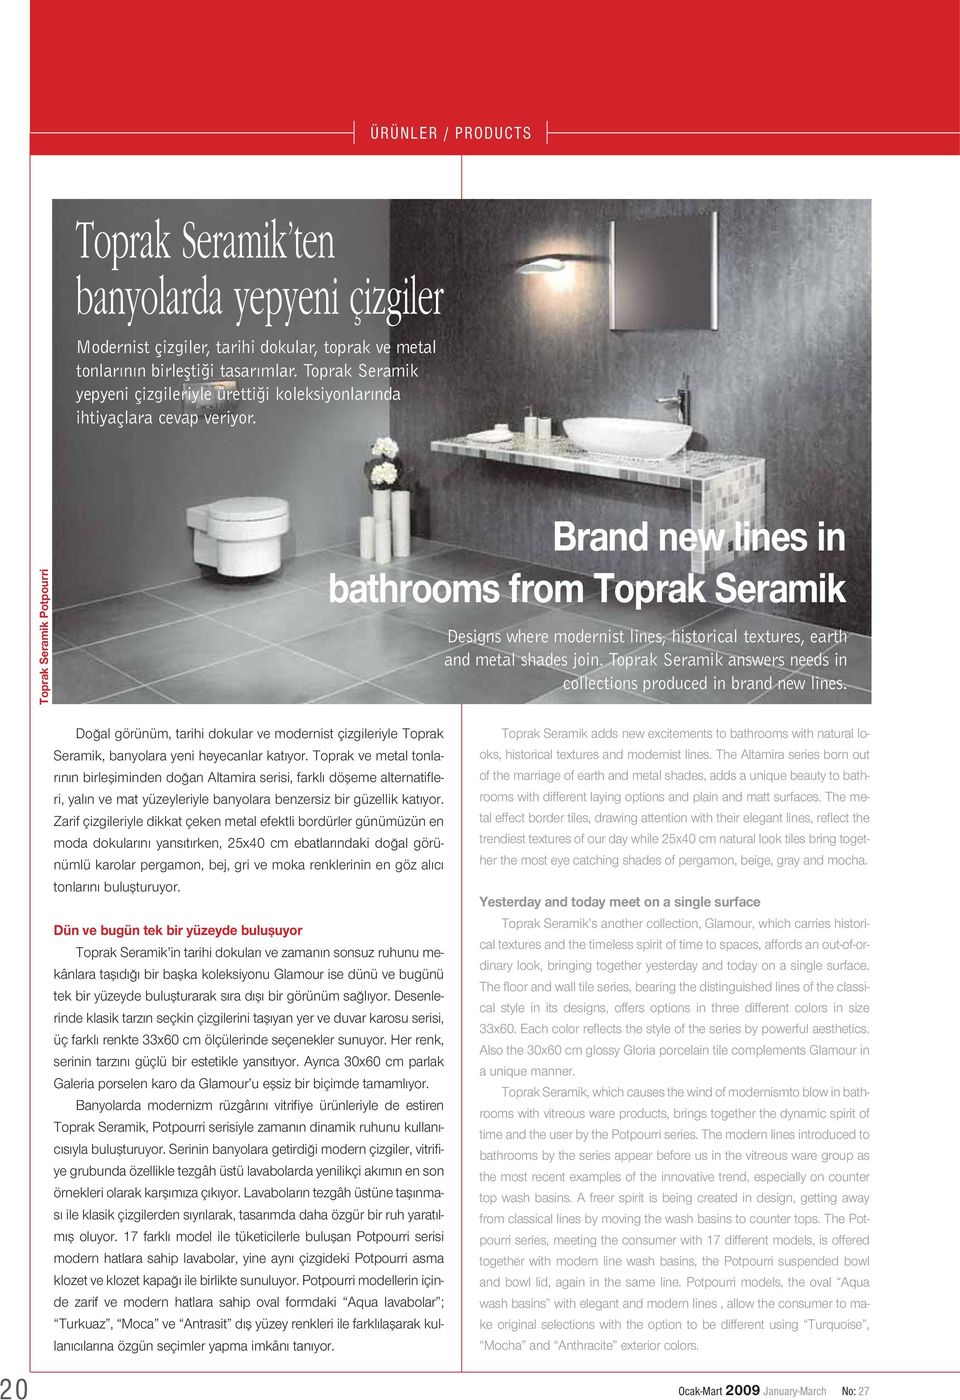 Toprak Seramik Potpourri Brand new lines in bathrooms from Toprak Seramik Designs where modernist lines, historical textures, earth and metal shades join.